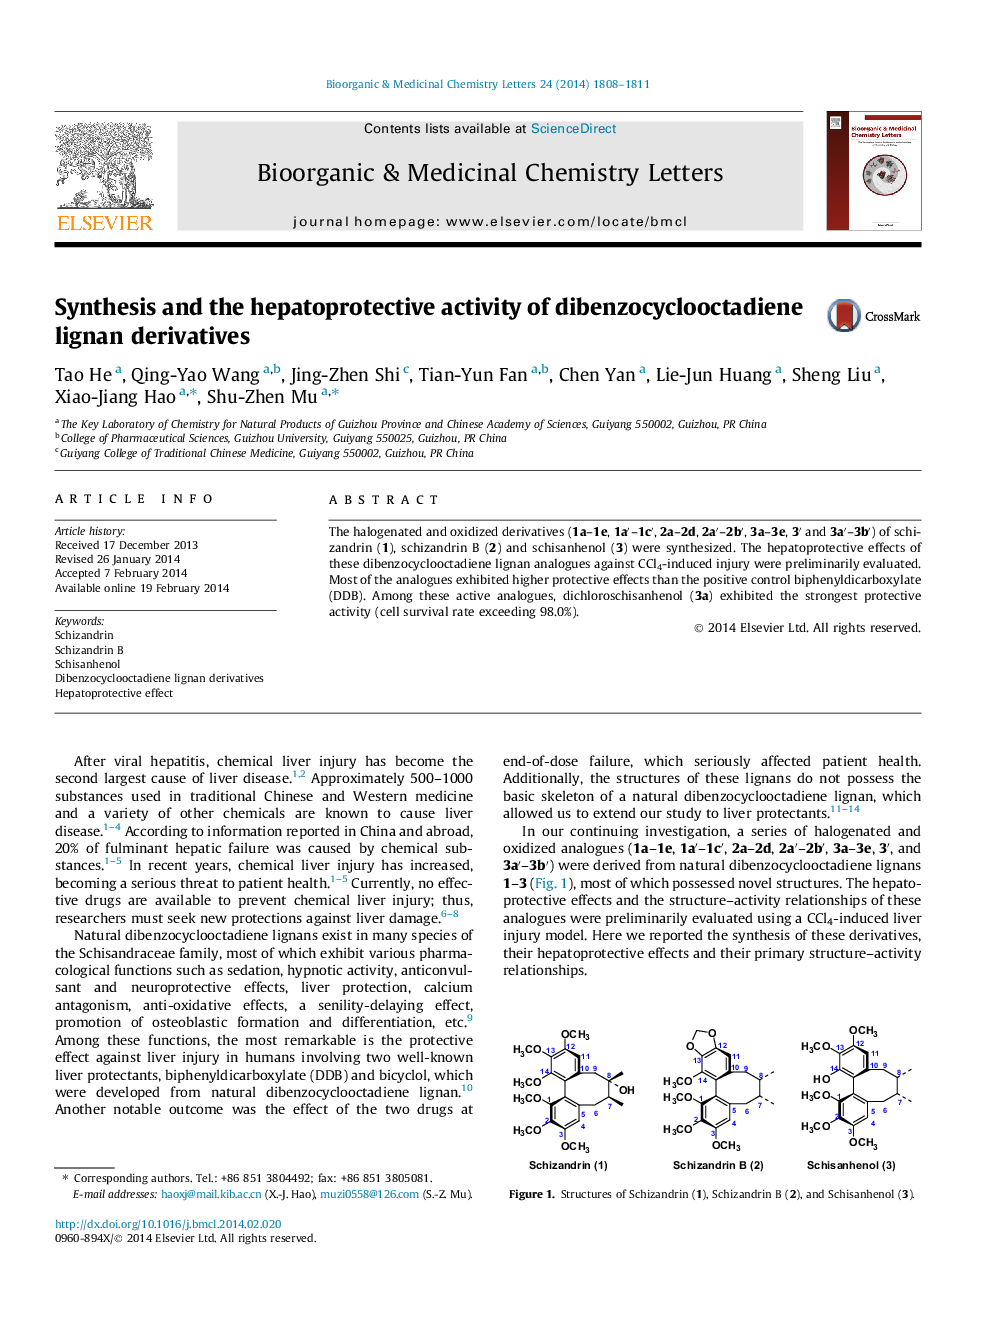 Synthesis and the hepatoprotective activity of dibenzocyclooctadiene lignan derivatives